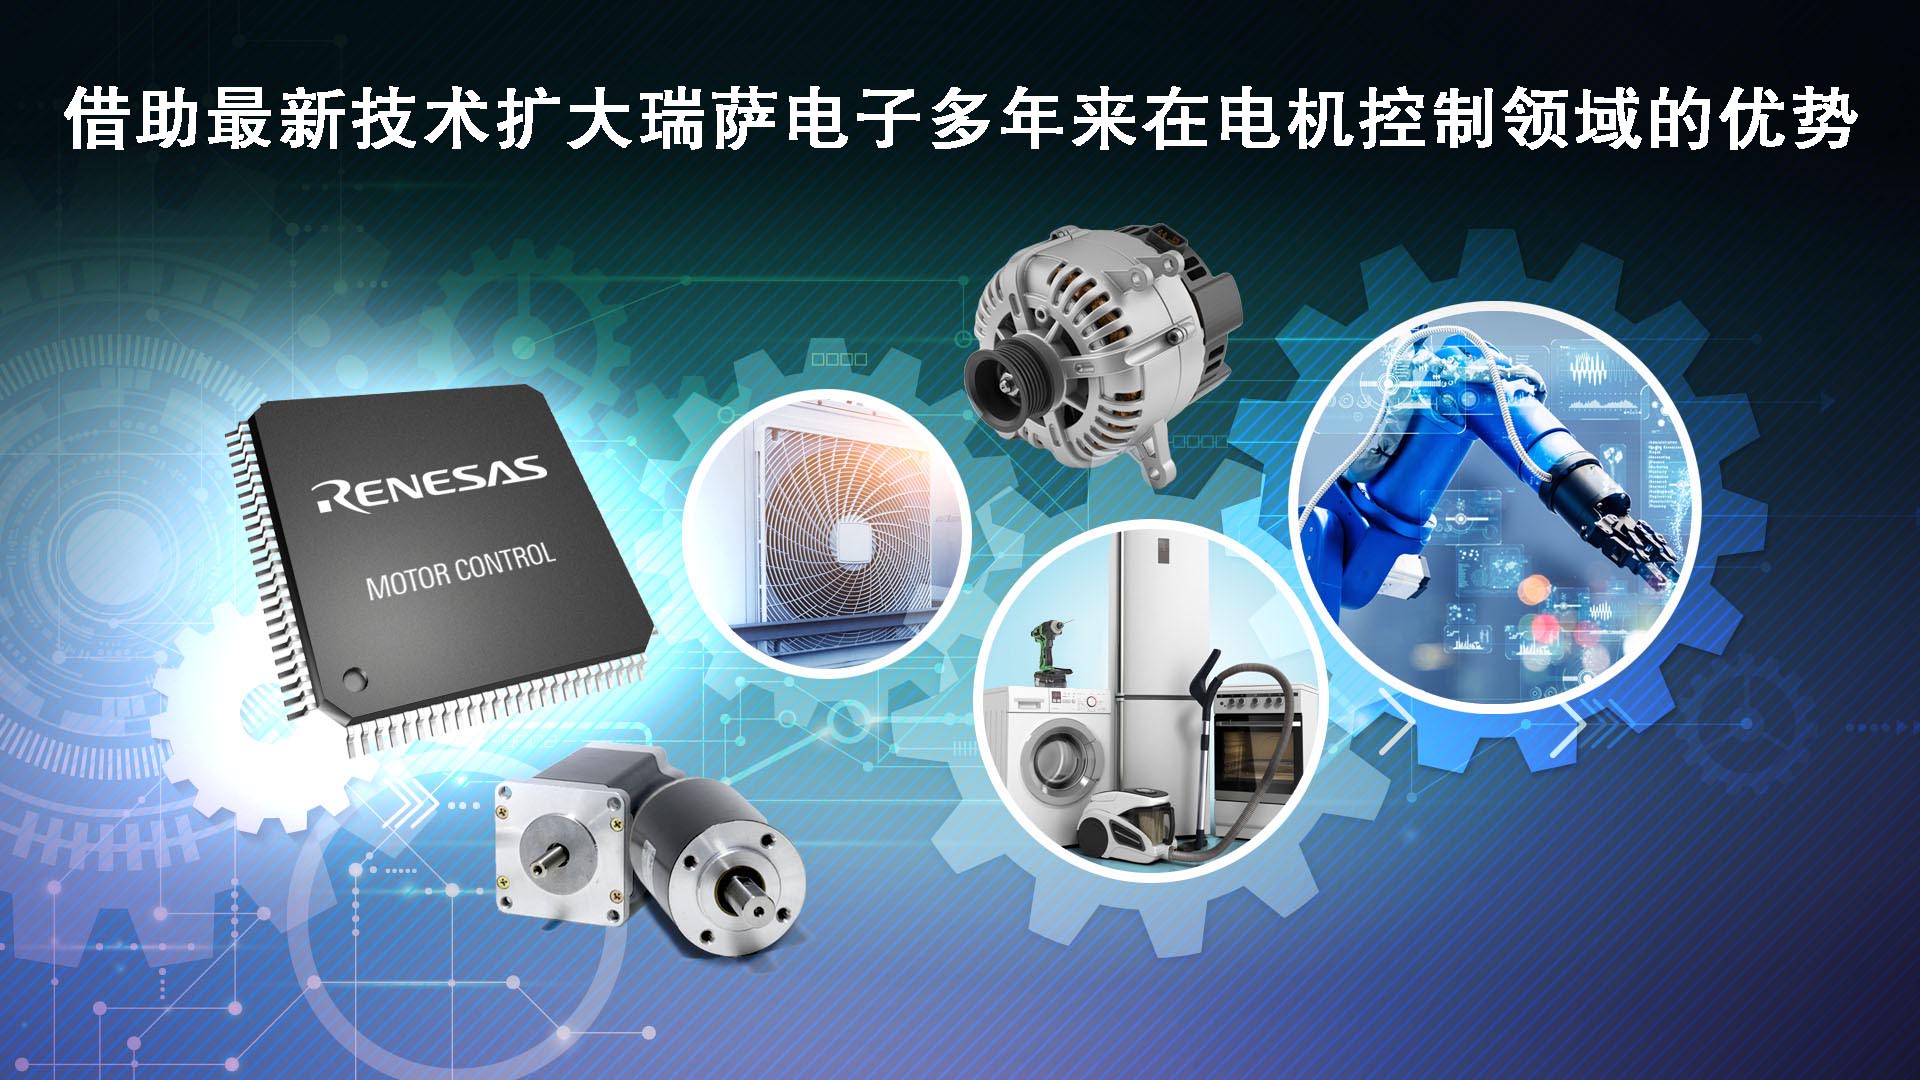 Renesas Electronics Expands Lineup of Motor Control Embedded Processing Products with Over 35 New MCU Products - 絵